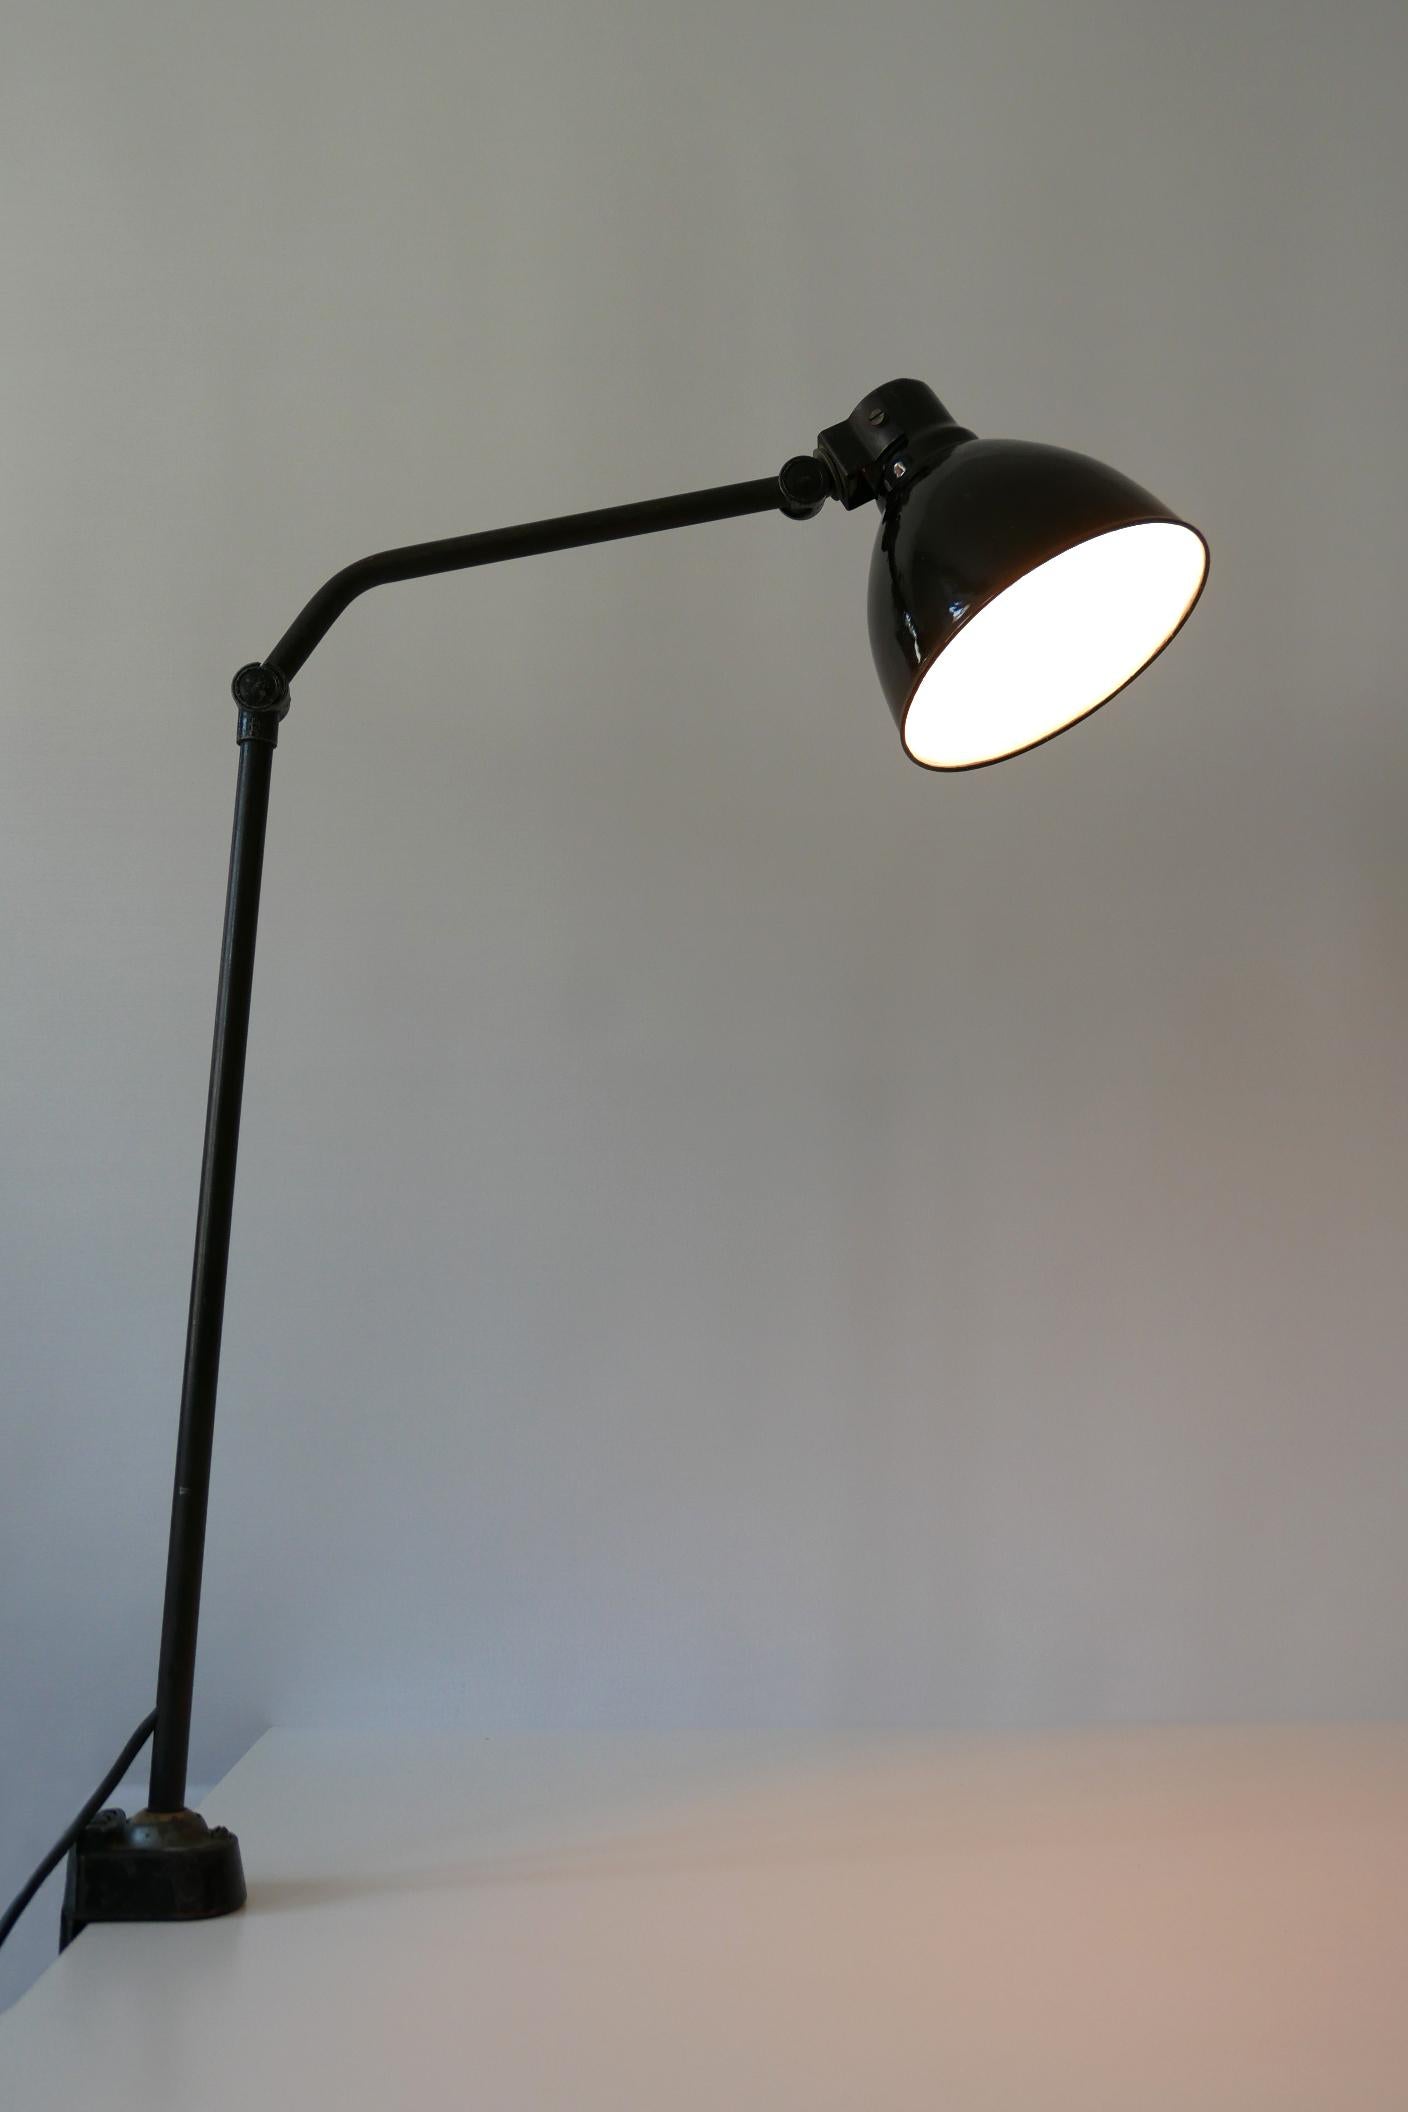 Mid-Century Modern Bauhaus Task Lamp or Clamp Table Light by Peter Behrens for AEG 1920s, Germany